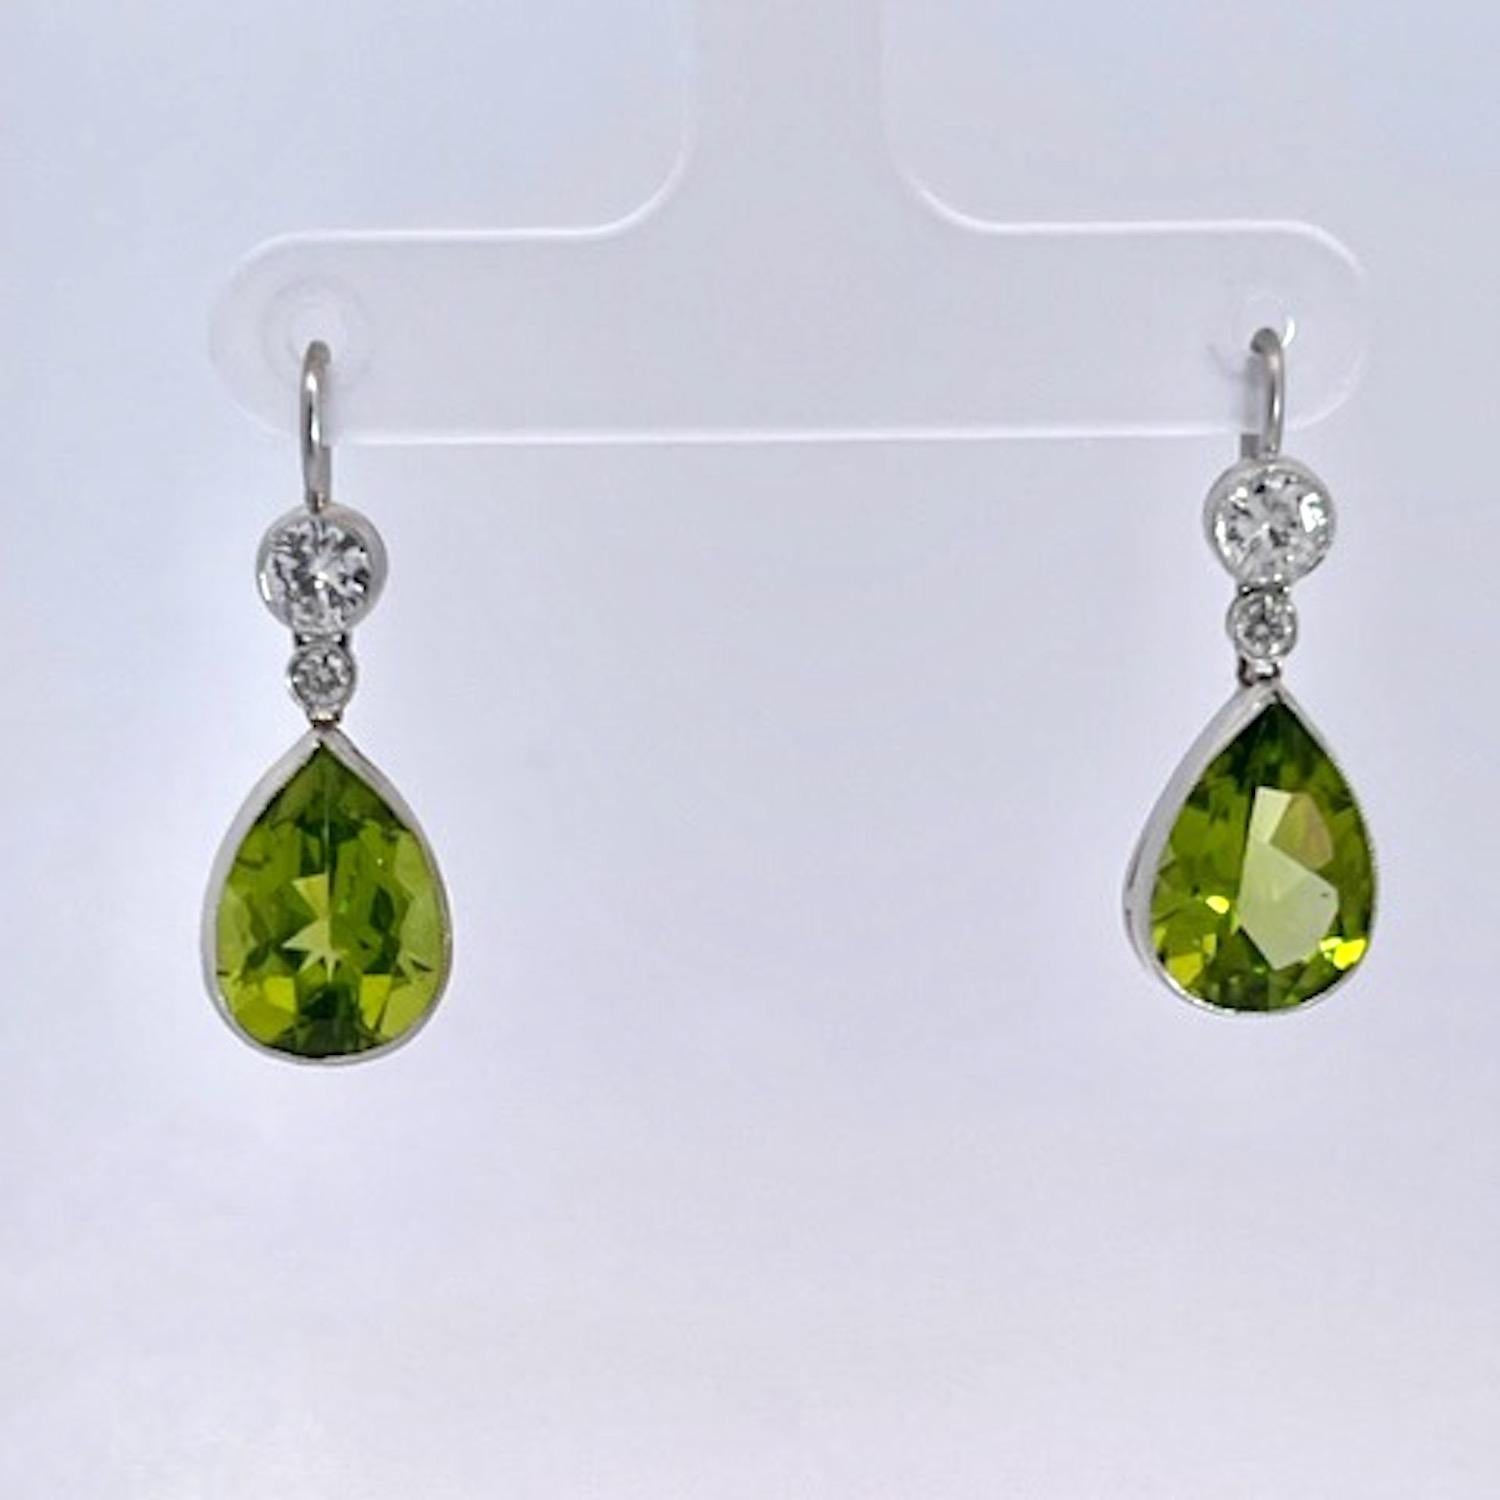 These Peridot Earrings are simple yet pack a punch.  August babies take note these are your birth stones.
These come out of Great Britain and are simple with Shepard hooks and are made from high carat gold. Each Peridot is pear shaped and weight in